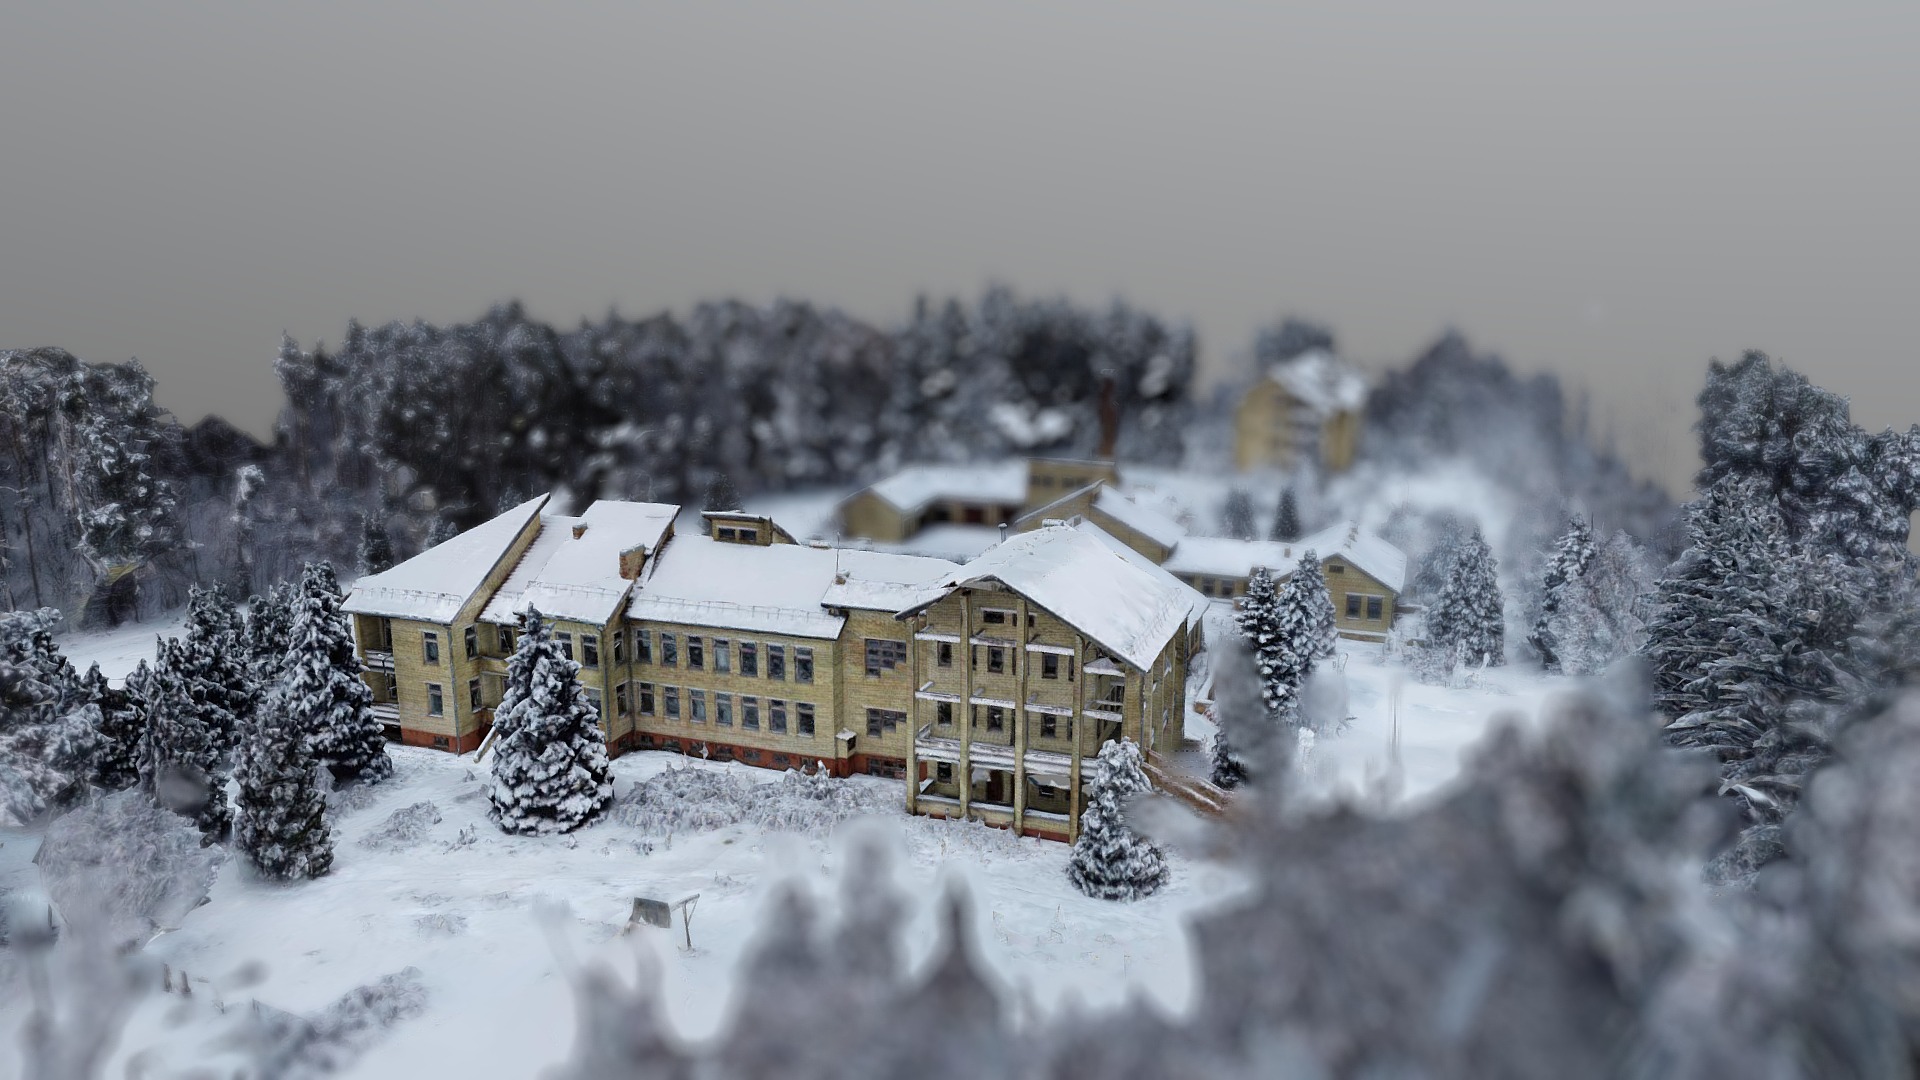 3D model Zapyskis 7,5cm - This is a 3D model of the Zapyskis 7,5cm. The 3D model is about a large building surrounded by snow.